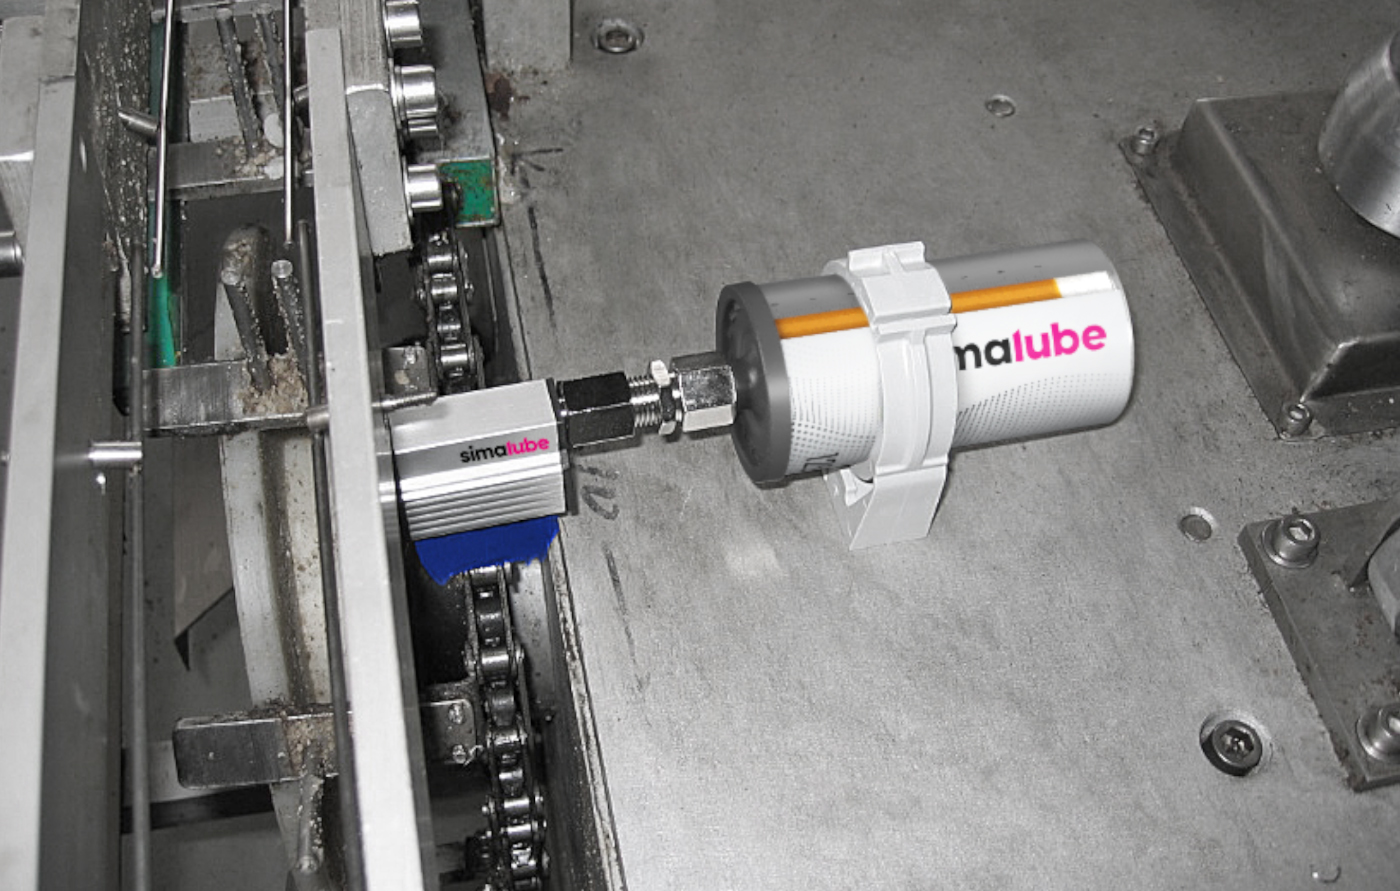 In the food industry, the simalube lubrication system is equipped with special brushes.